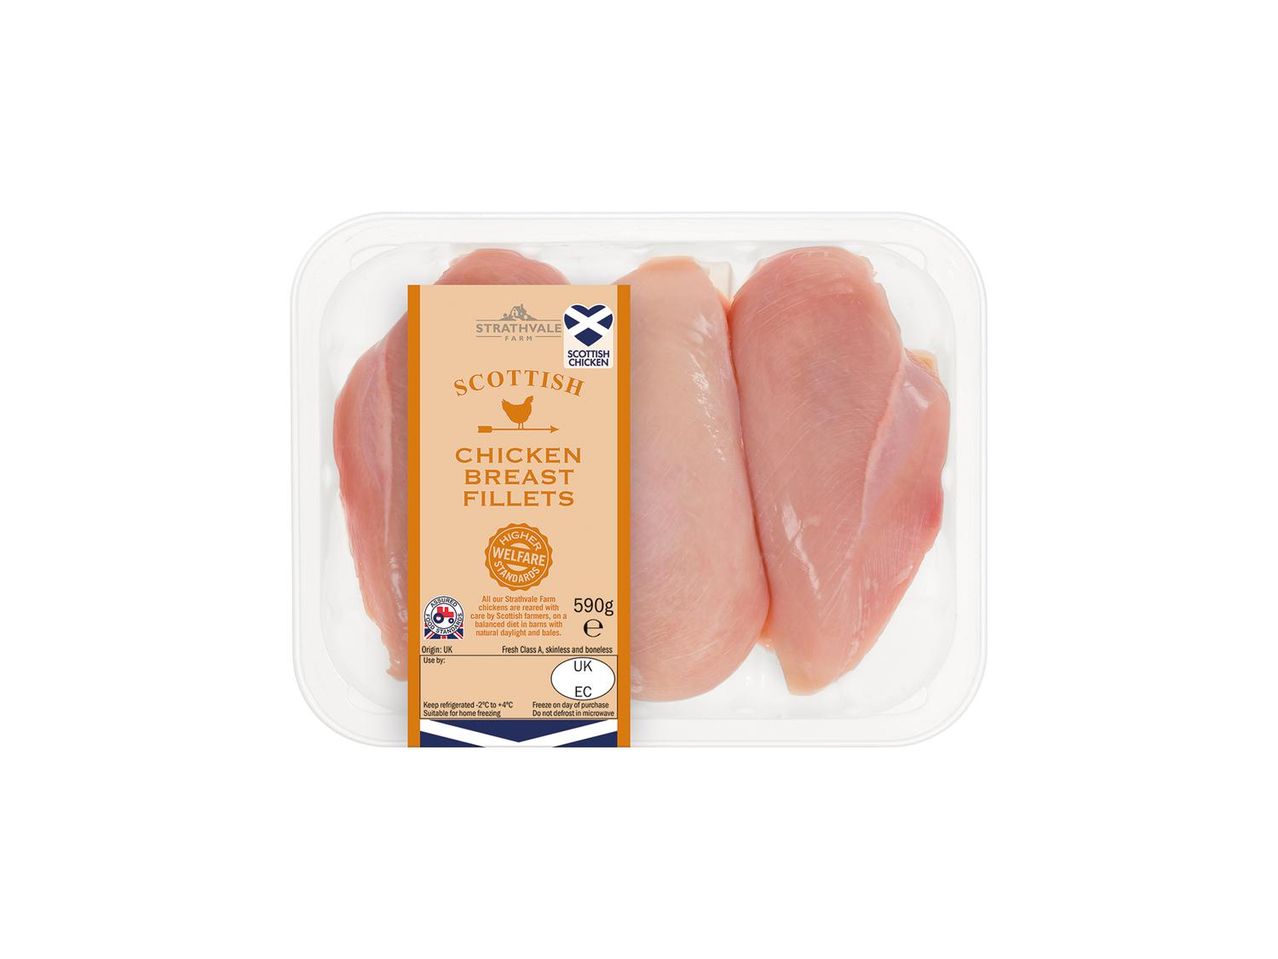 Go to full screen view: Strathvale Farm Scottish Chicken Breast Fillets - Image 1